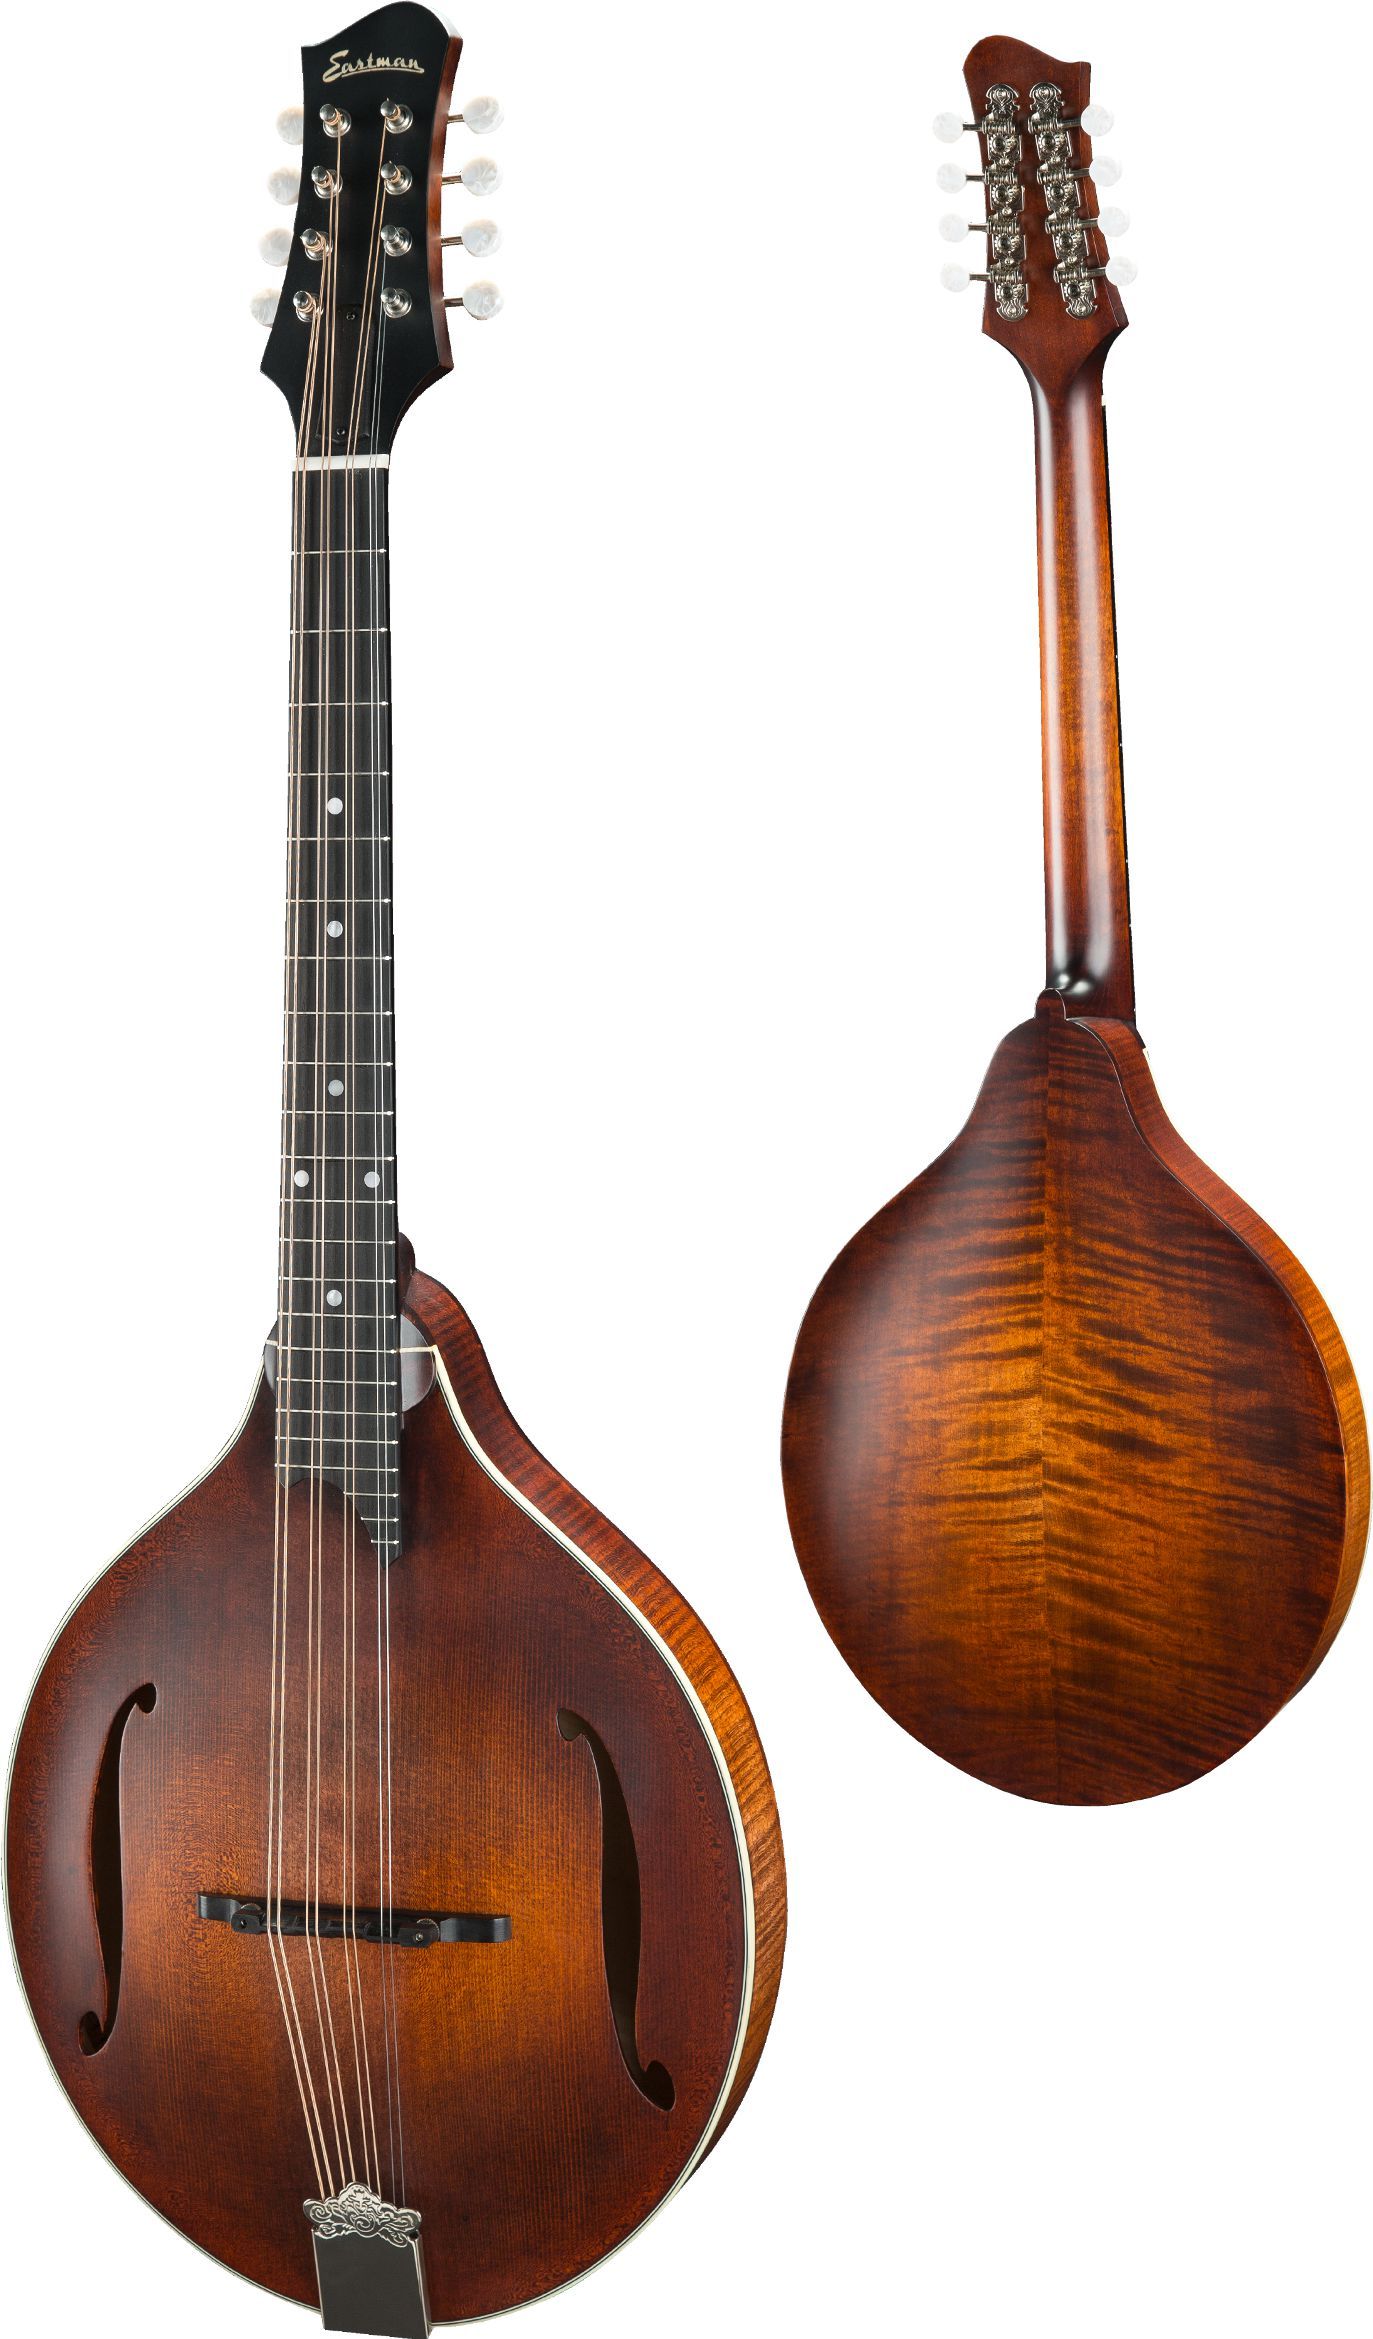 Eastman MDO-305 A-style Mandolin (Octave mandoline S-holes, Solid Spruce top, Solid Maple back and sides, w/Gigbag), Mandolin for sale at Richards Guitars.